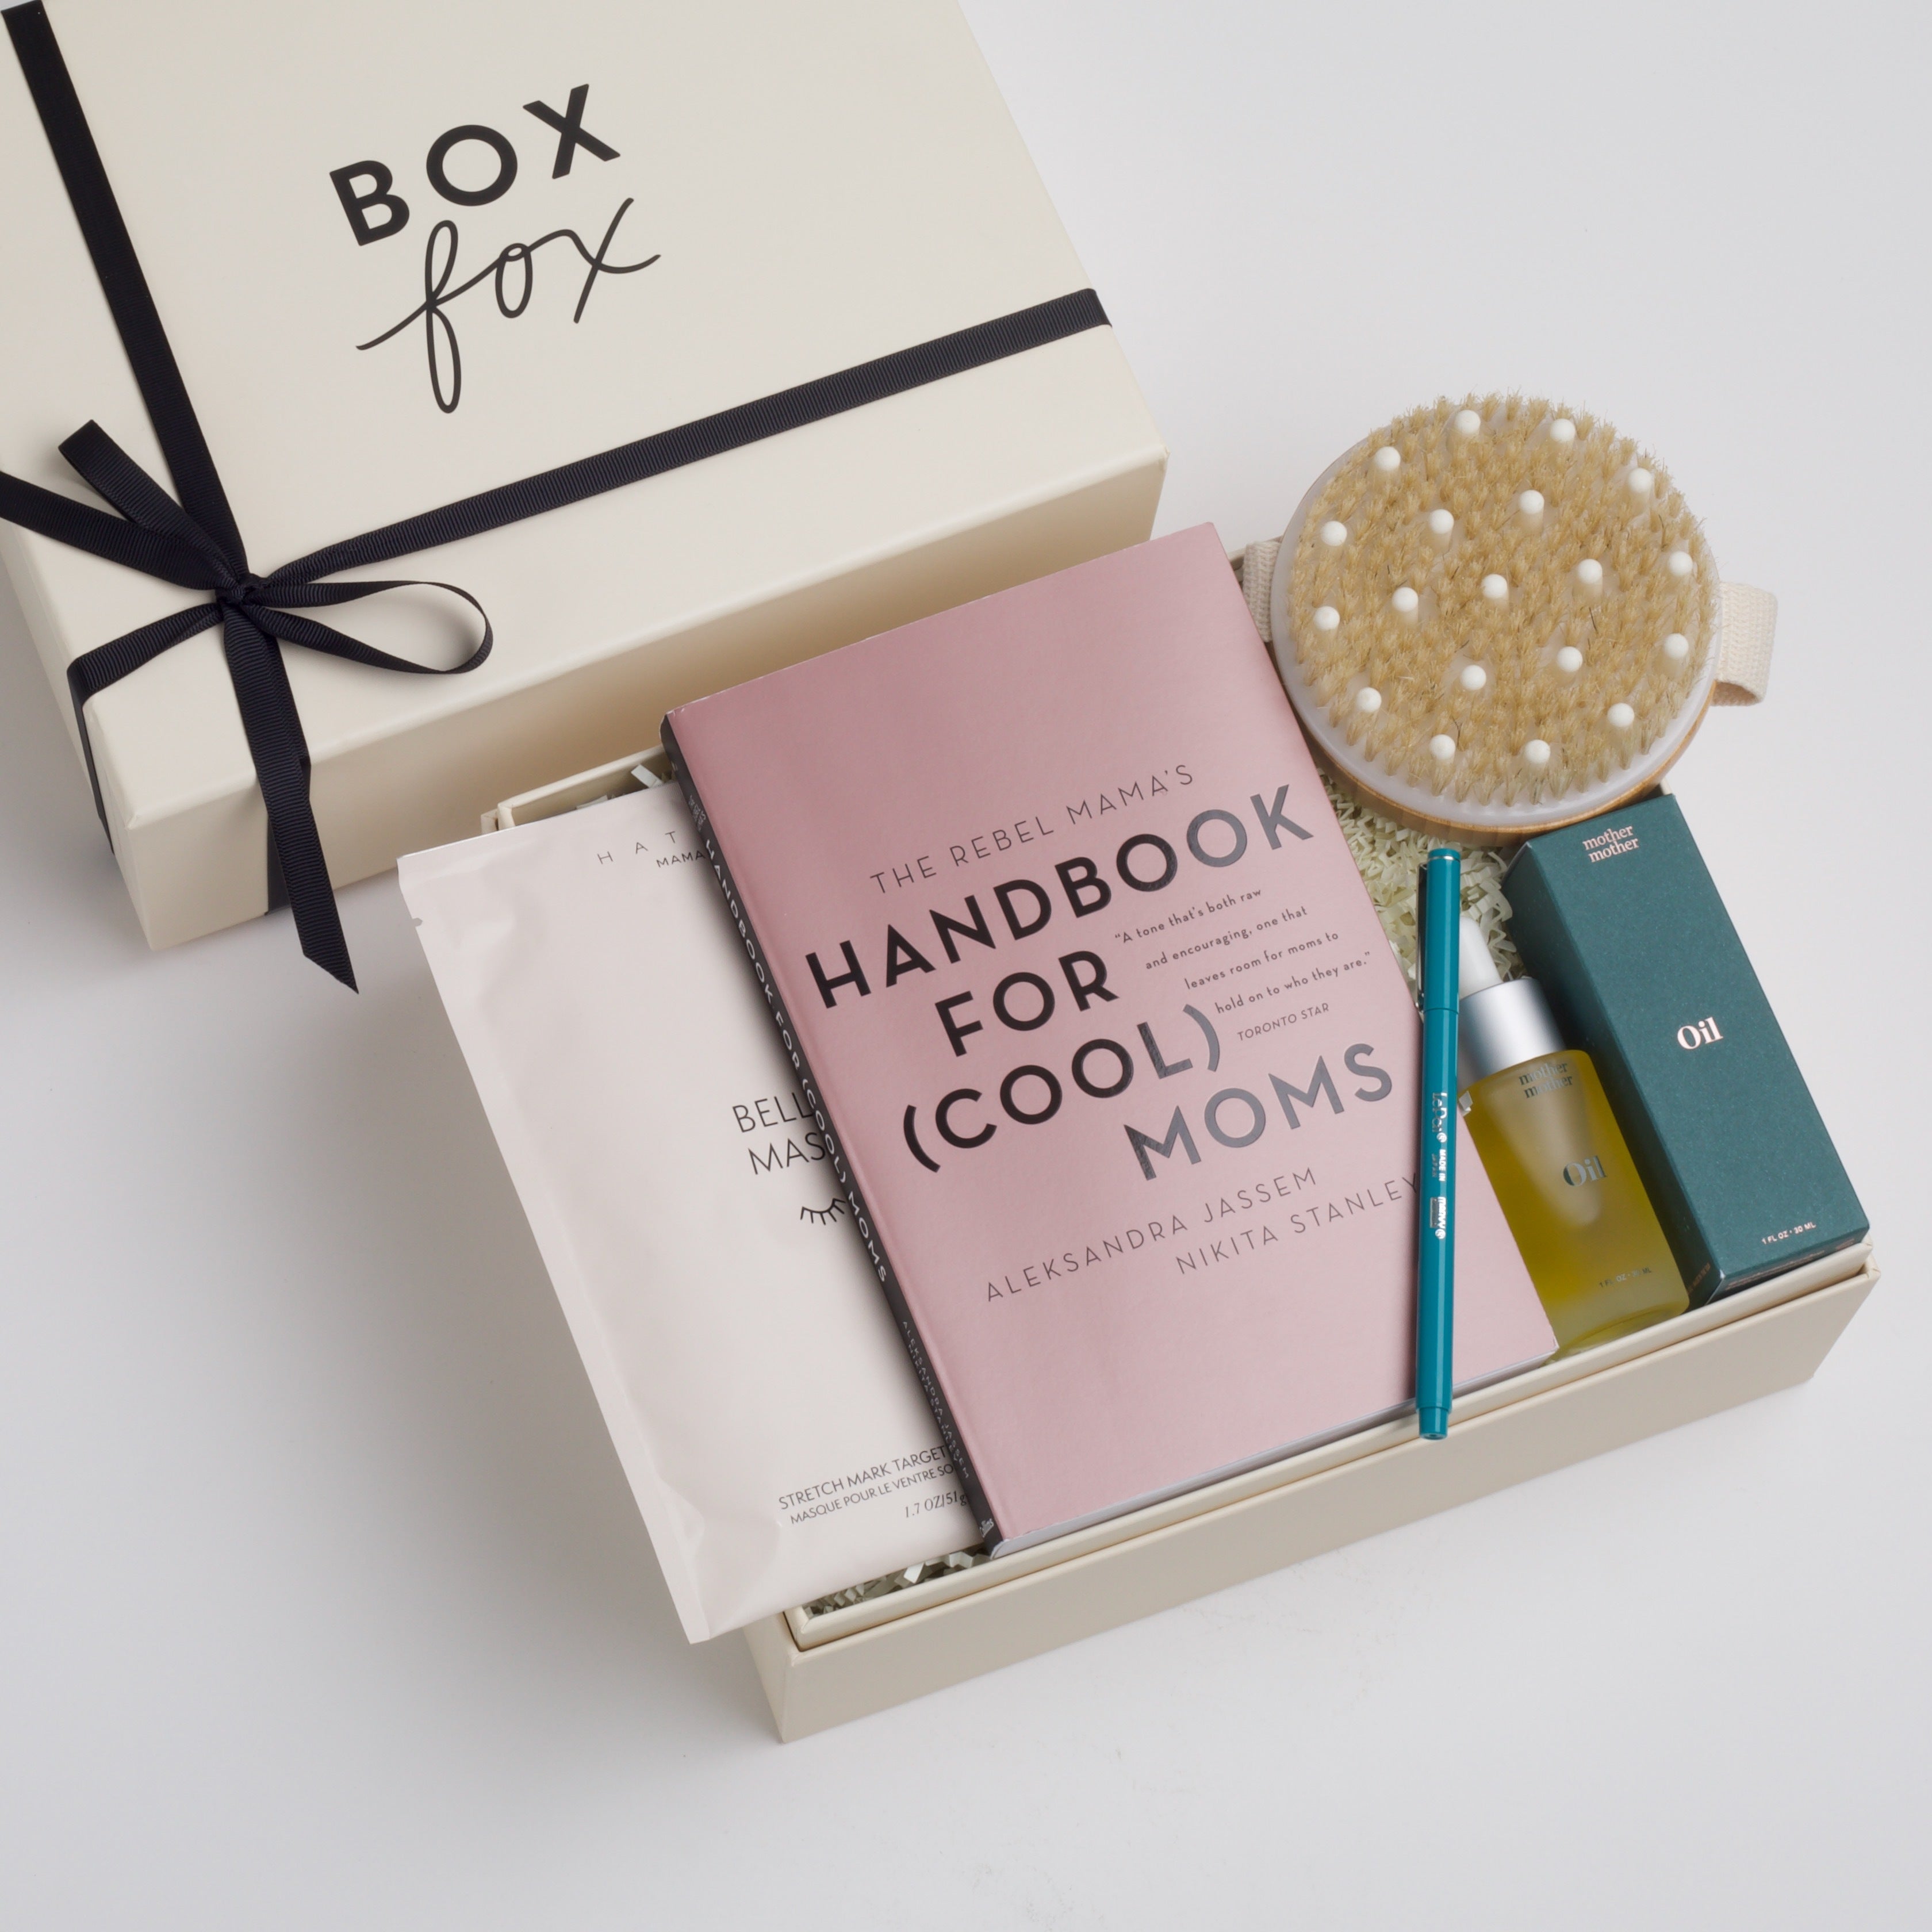 BOXFOX Gift Box filled with Handbook for (Cool) Moms, Le Pen Teal Pen, Mother Mother Belly Oil, HATCH Belly Sheet Mask, and Skön Round Dry Brush